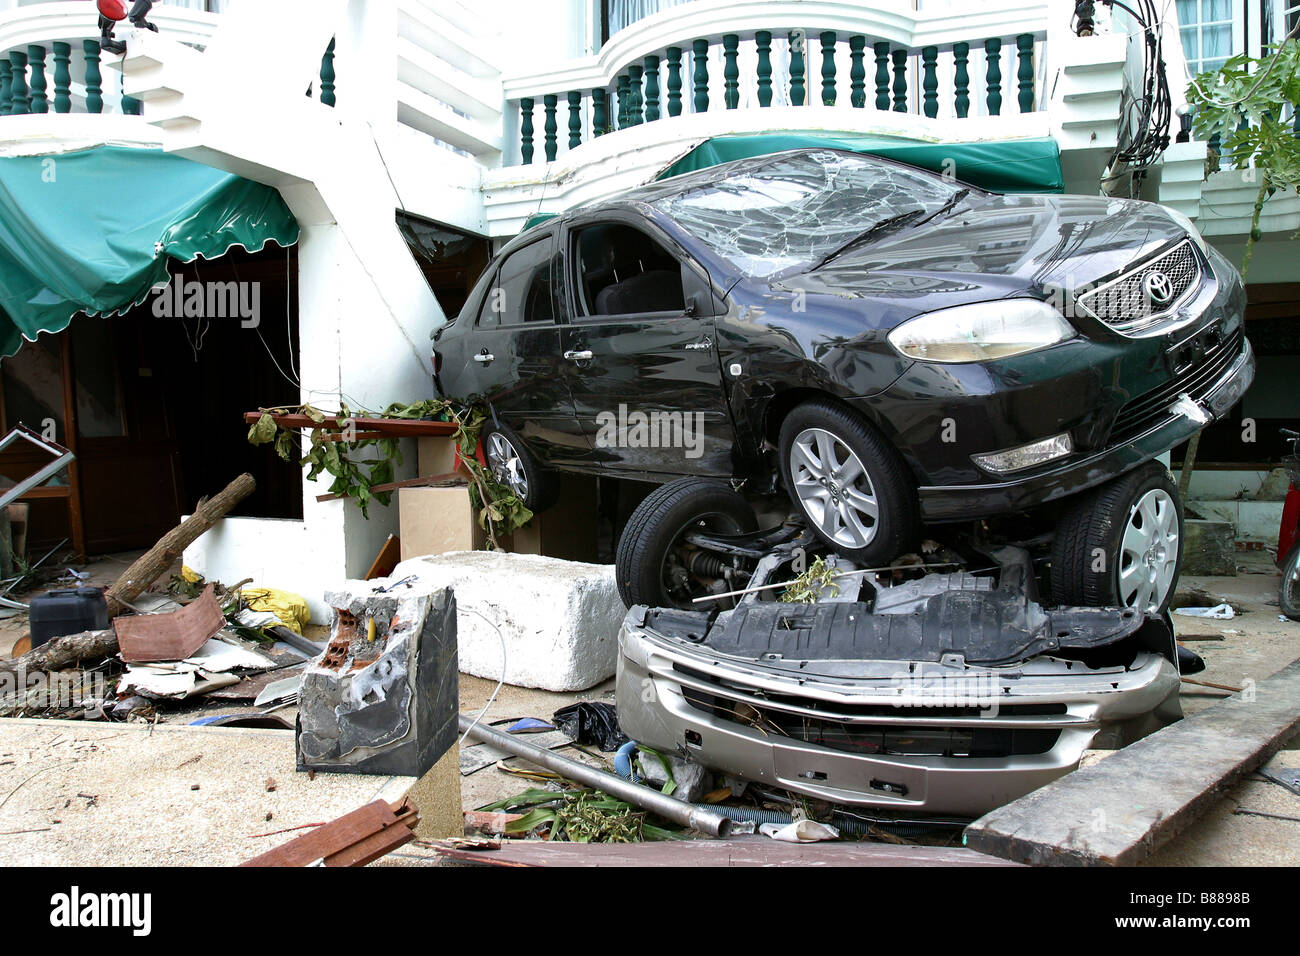 Debris and vehicles line the streets after the December 26, 2004 tsunami hit Patong Beach on Phuket Island, Thailand. Stock Photo